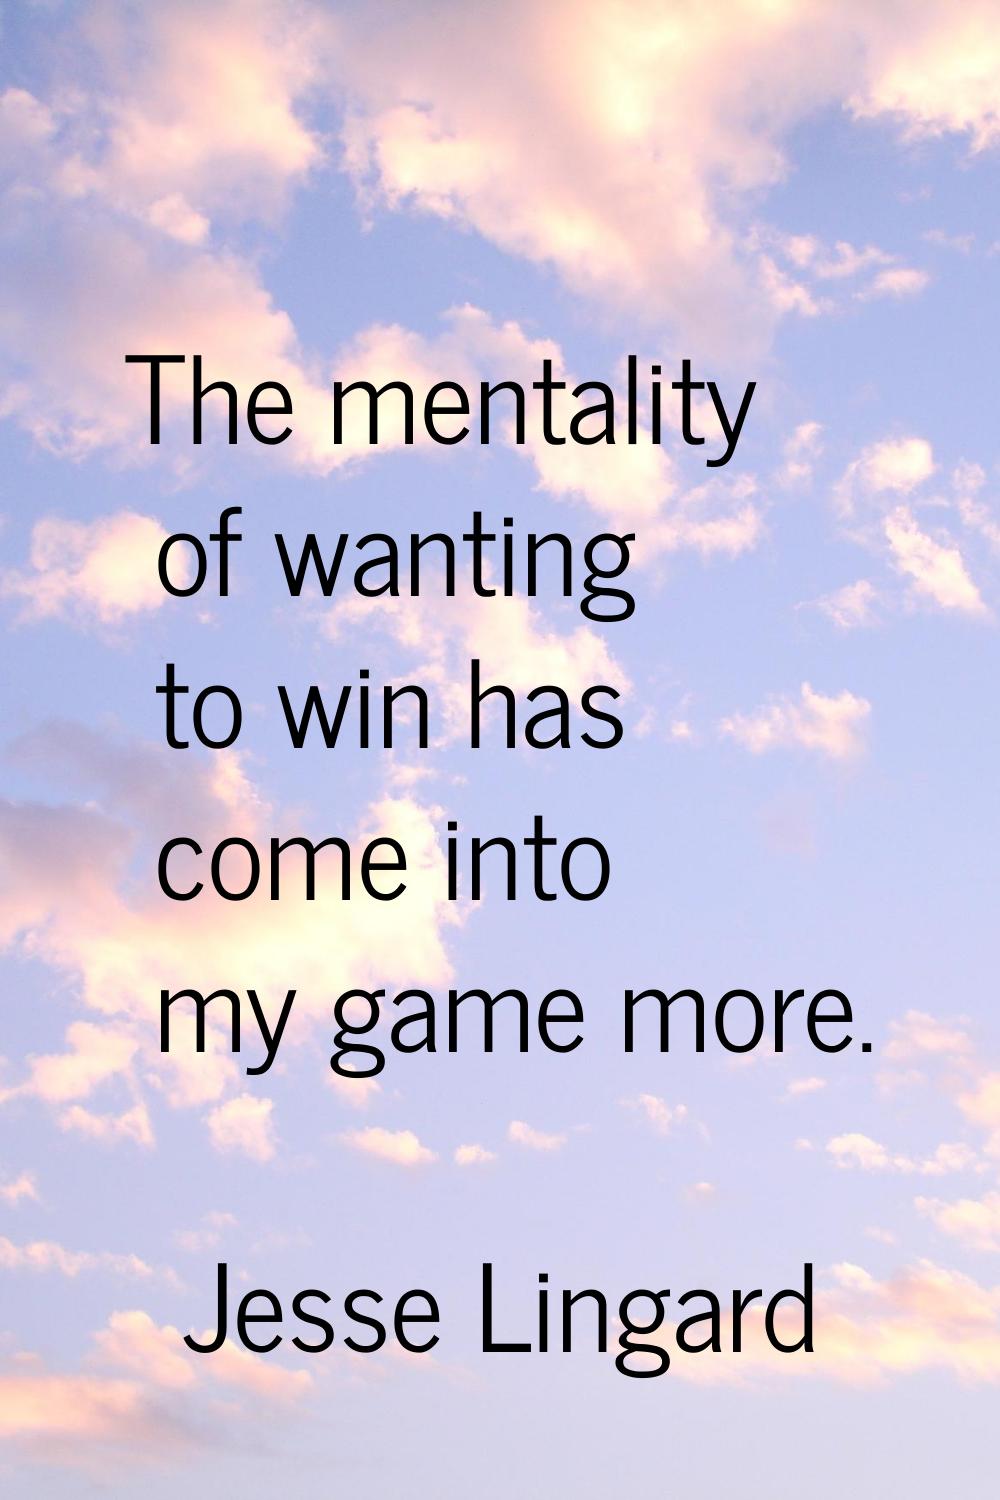 The mentality of wanting to win has come into my game more.